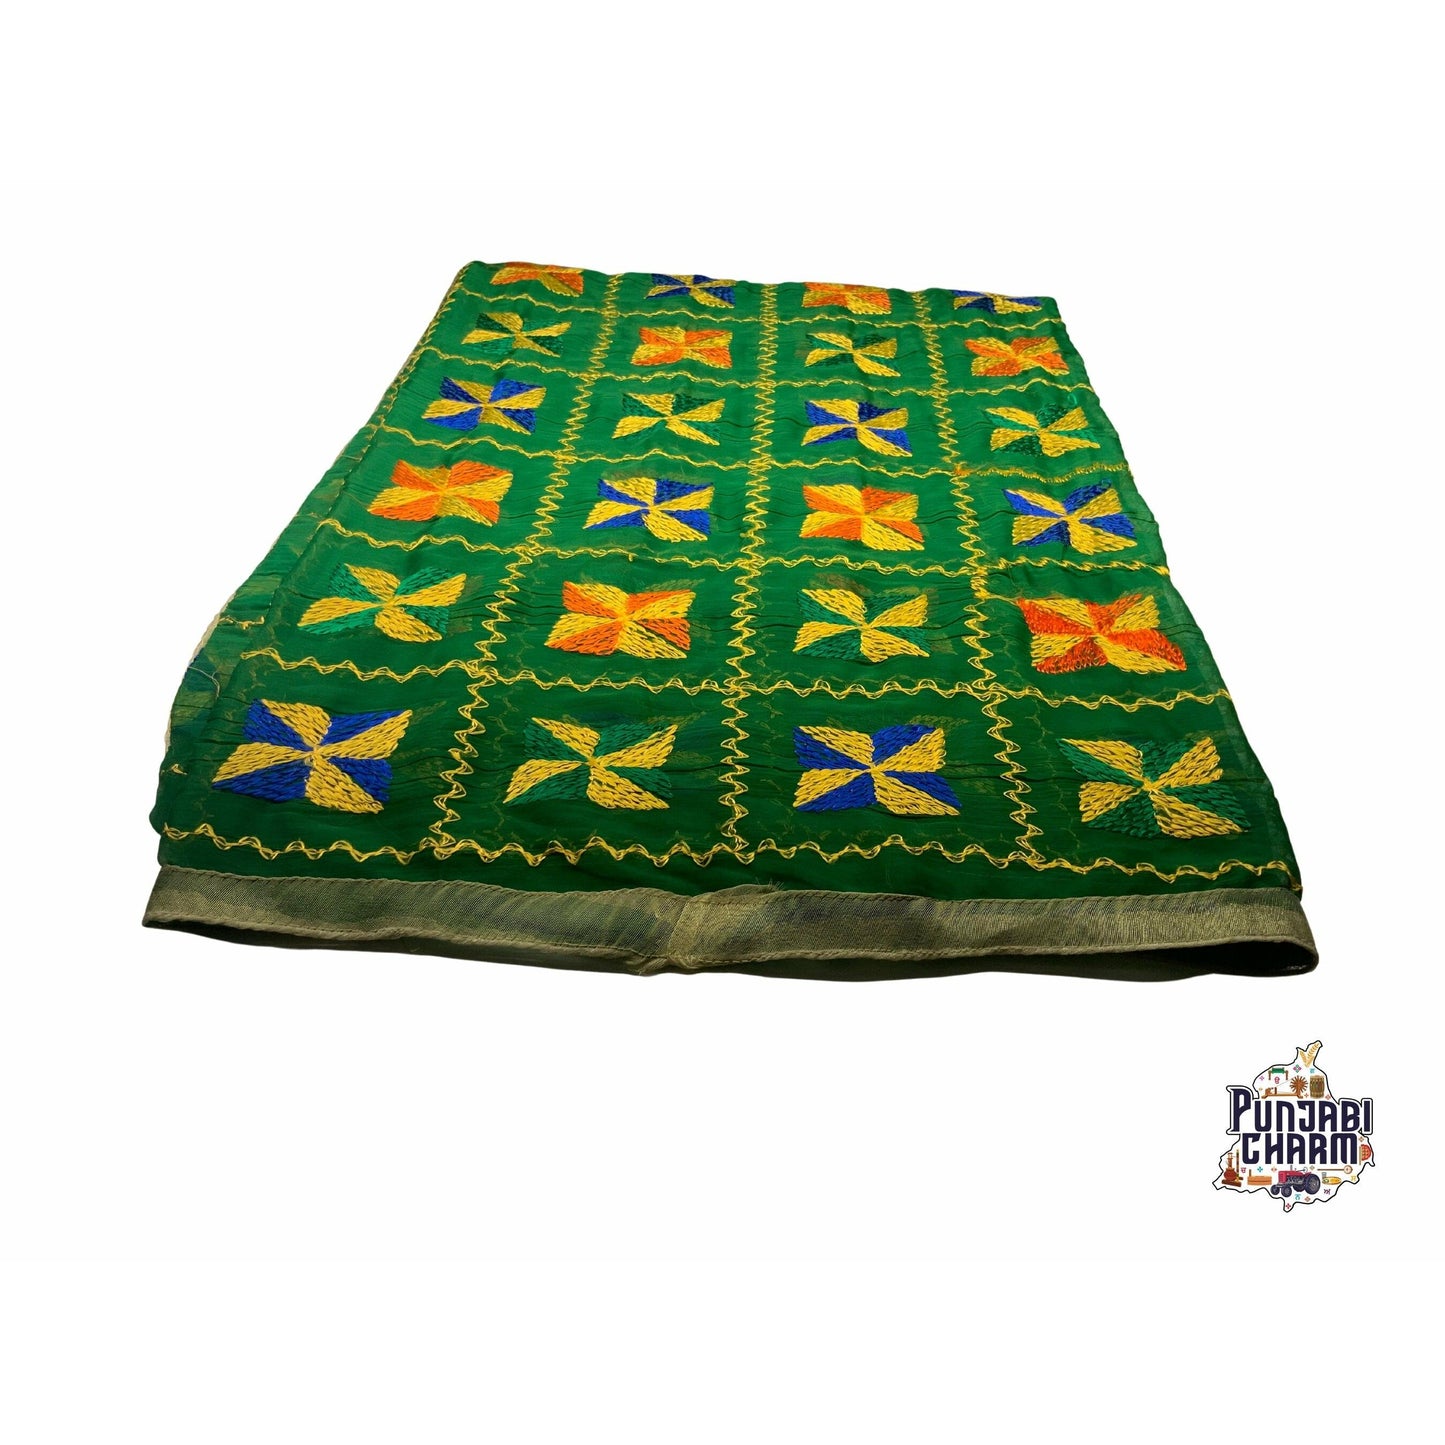 Beautiful Fulkari with green base and multi color flower patter + golden lace on all the borders